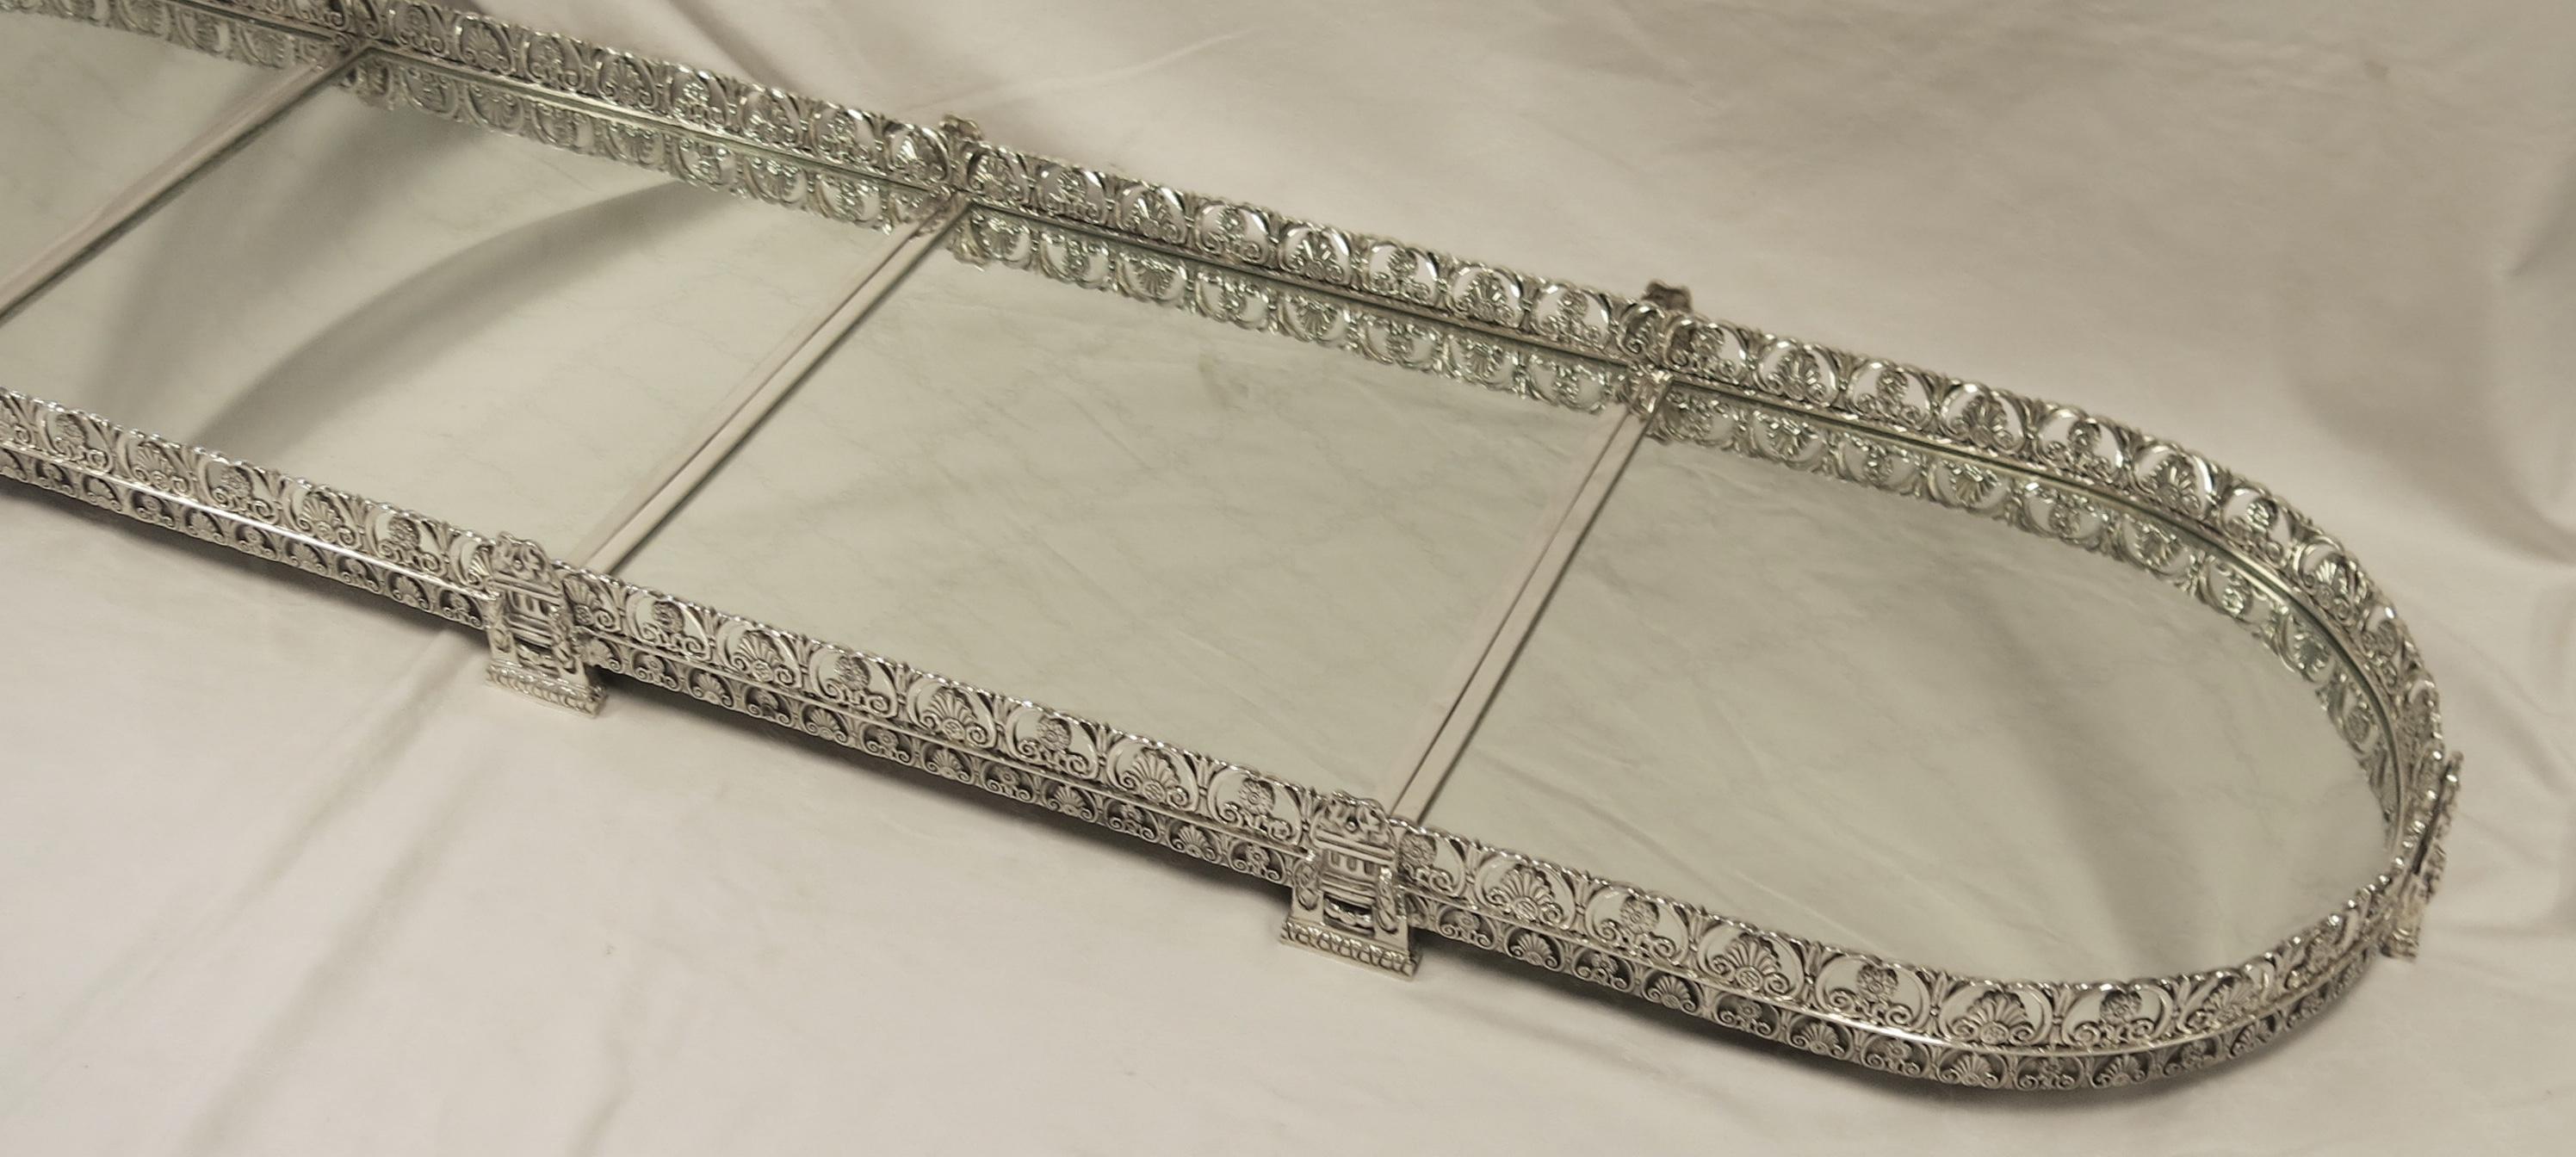 Silver Plate Four-Section Mirrored Top Table Plateau or Surtout De Table For Sale